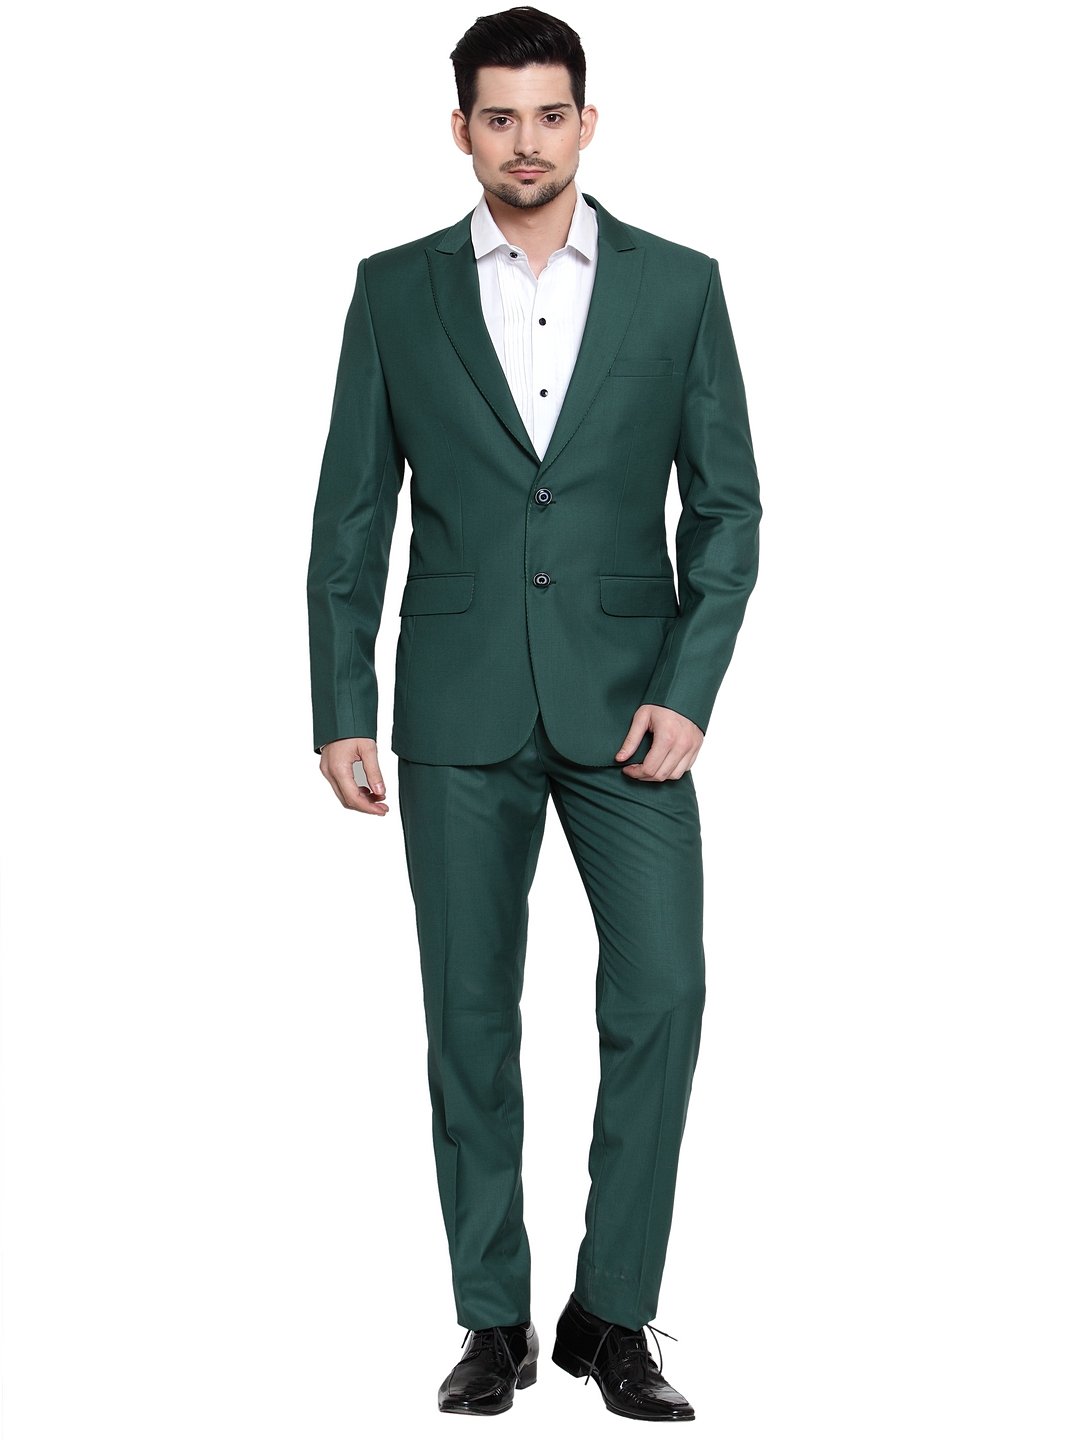 Green Suit with Pocket Square Outfits (19 ideas & outfits) | Lookastic